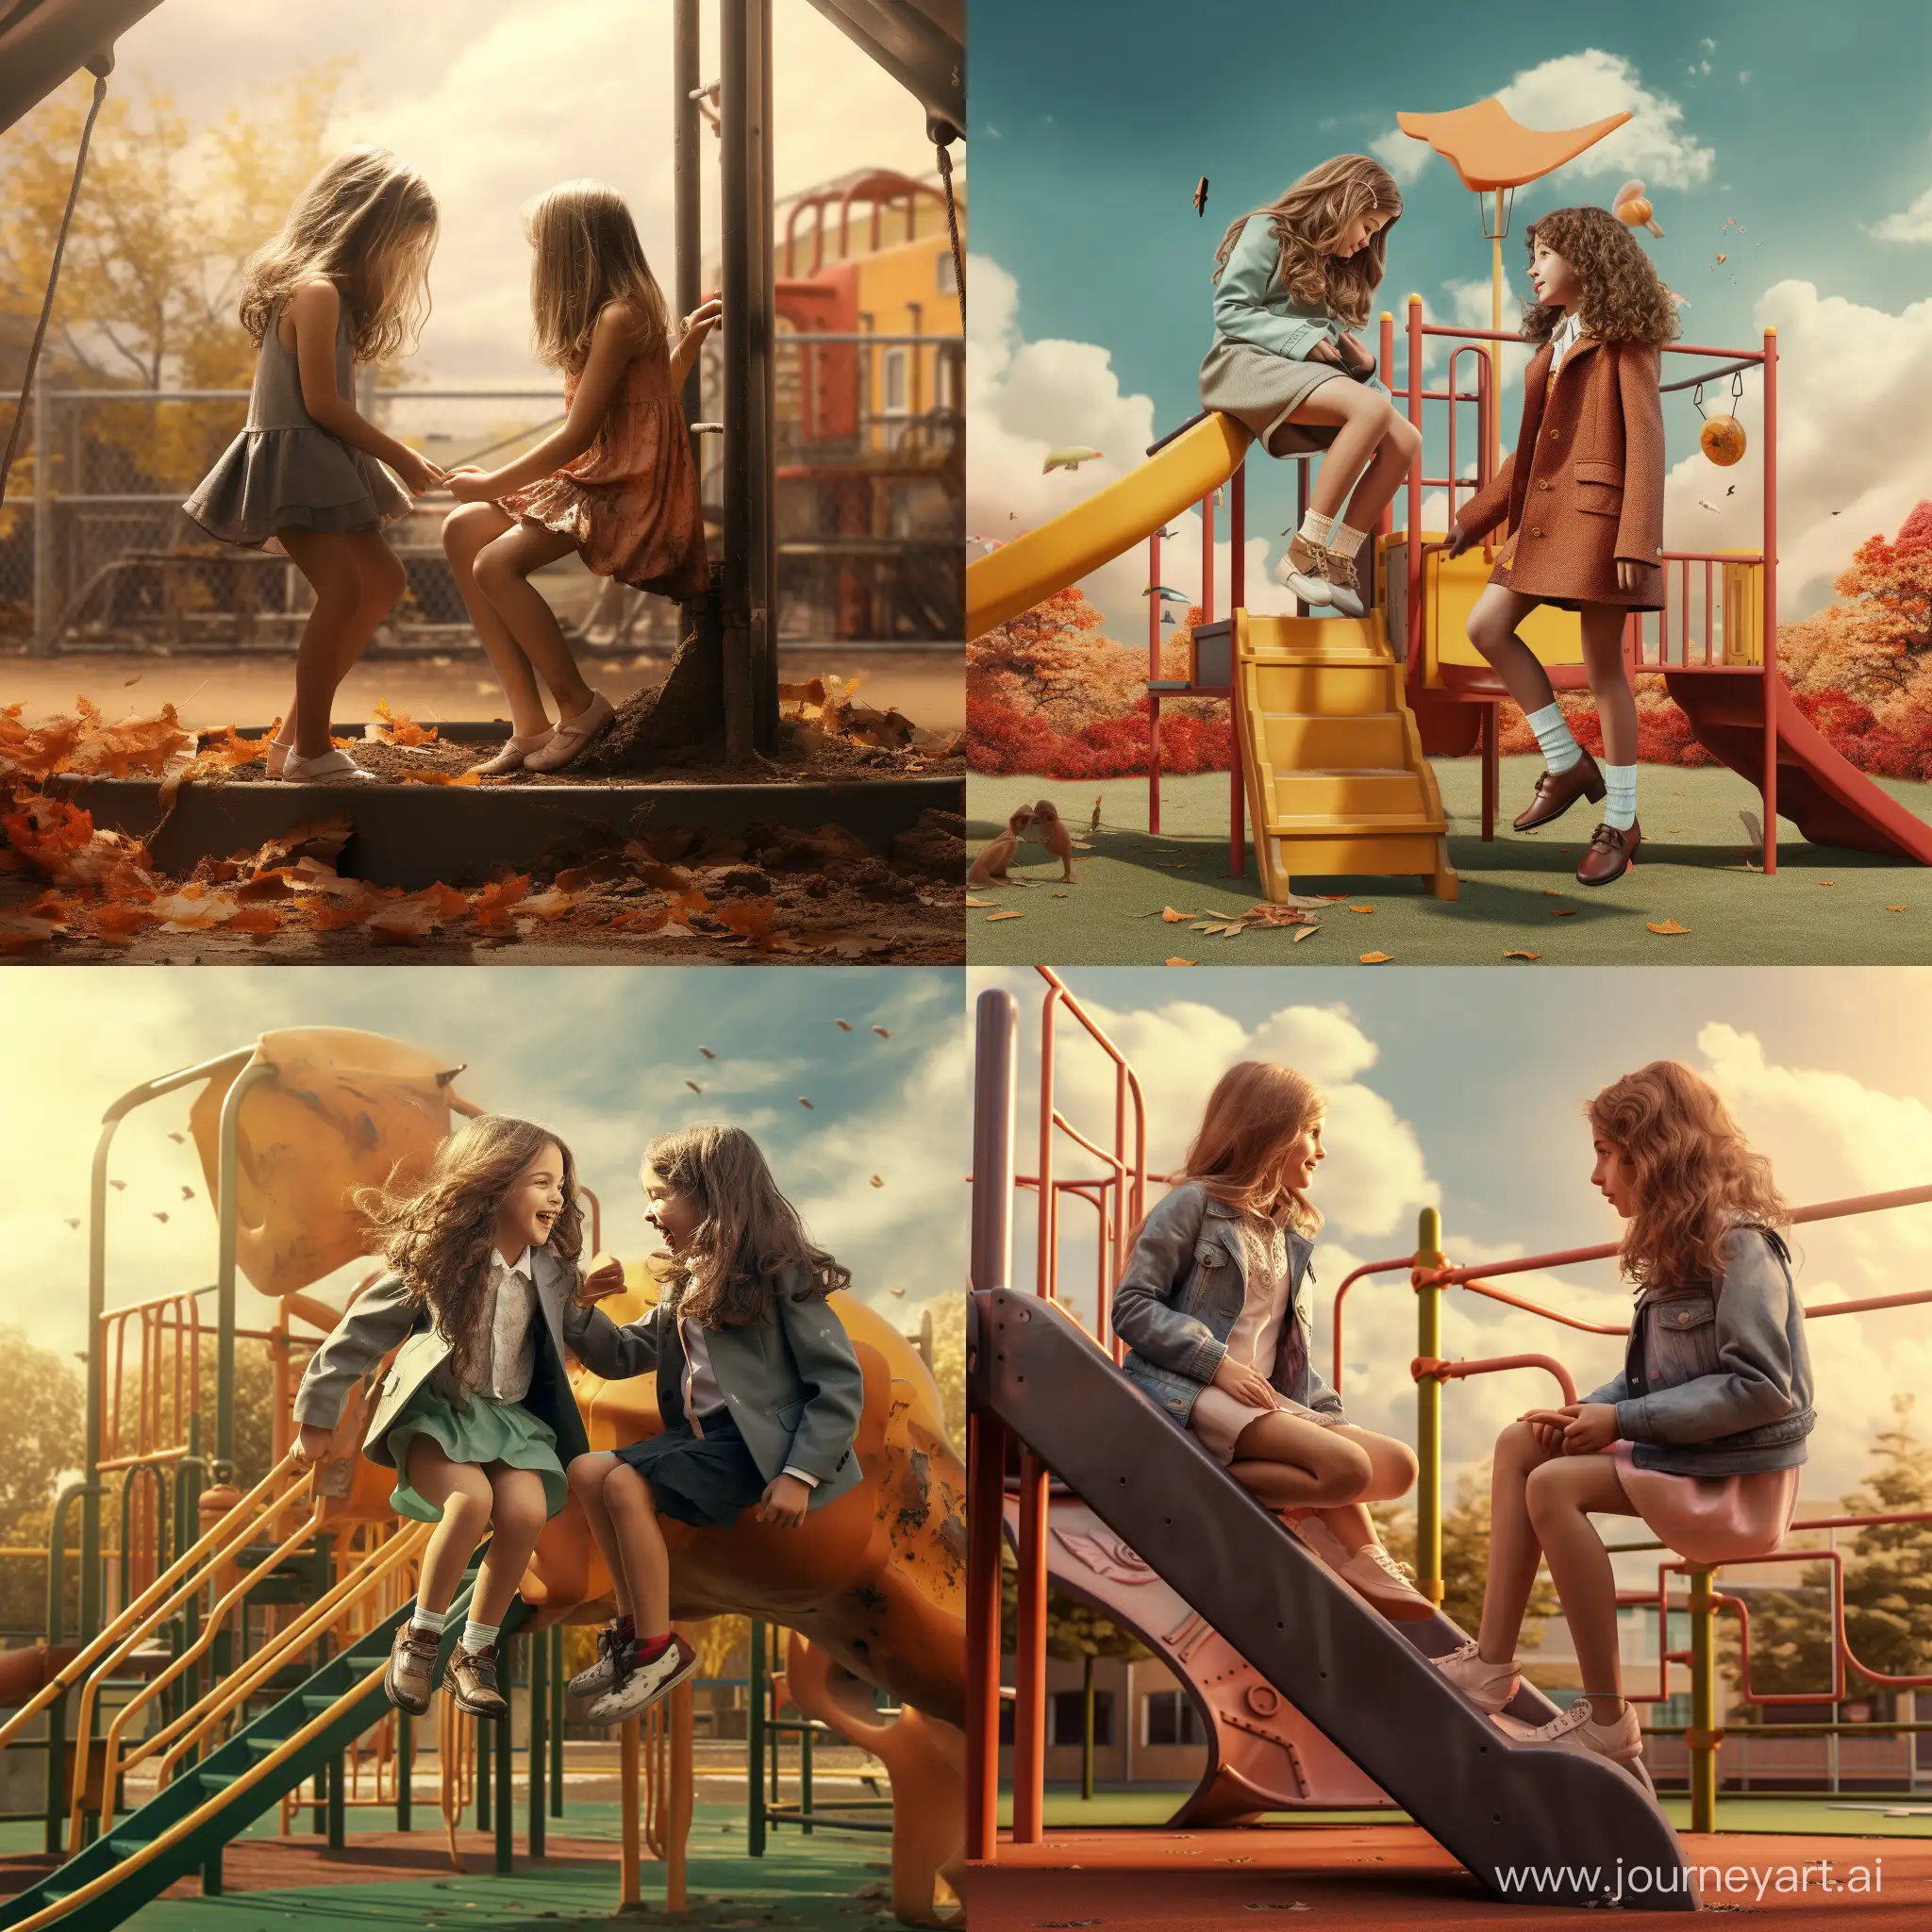 Create an image of two girls playing in a play ground